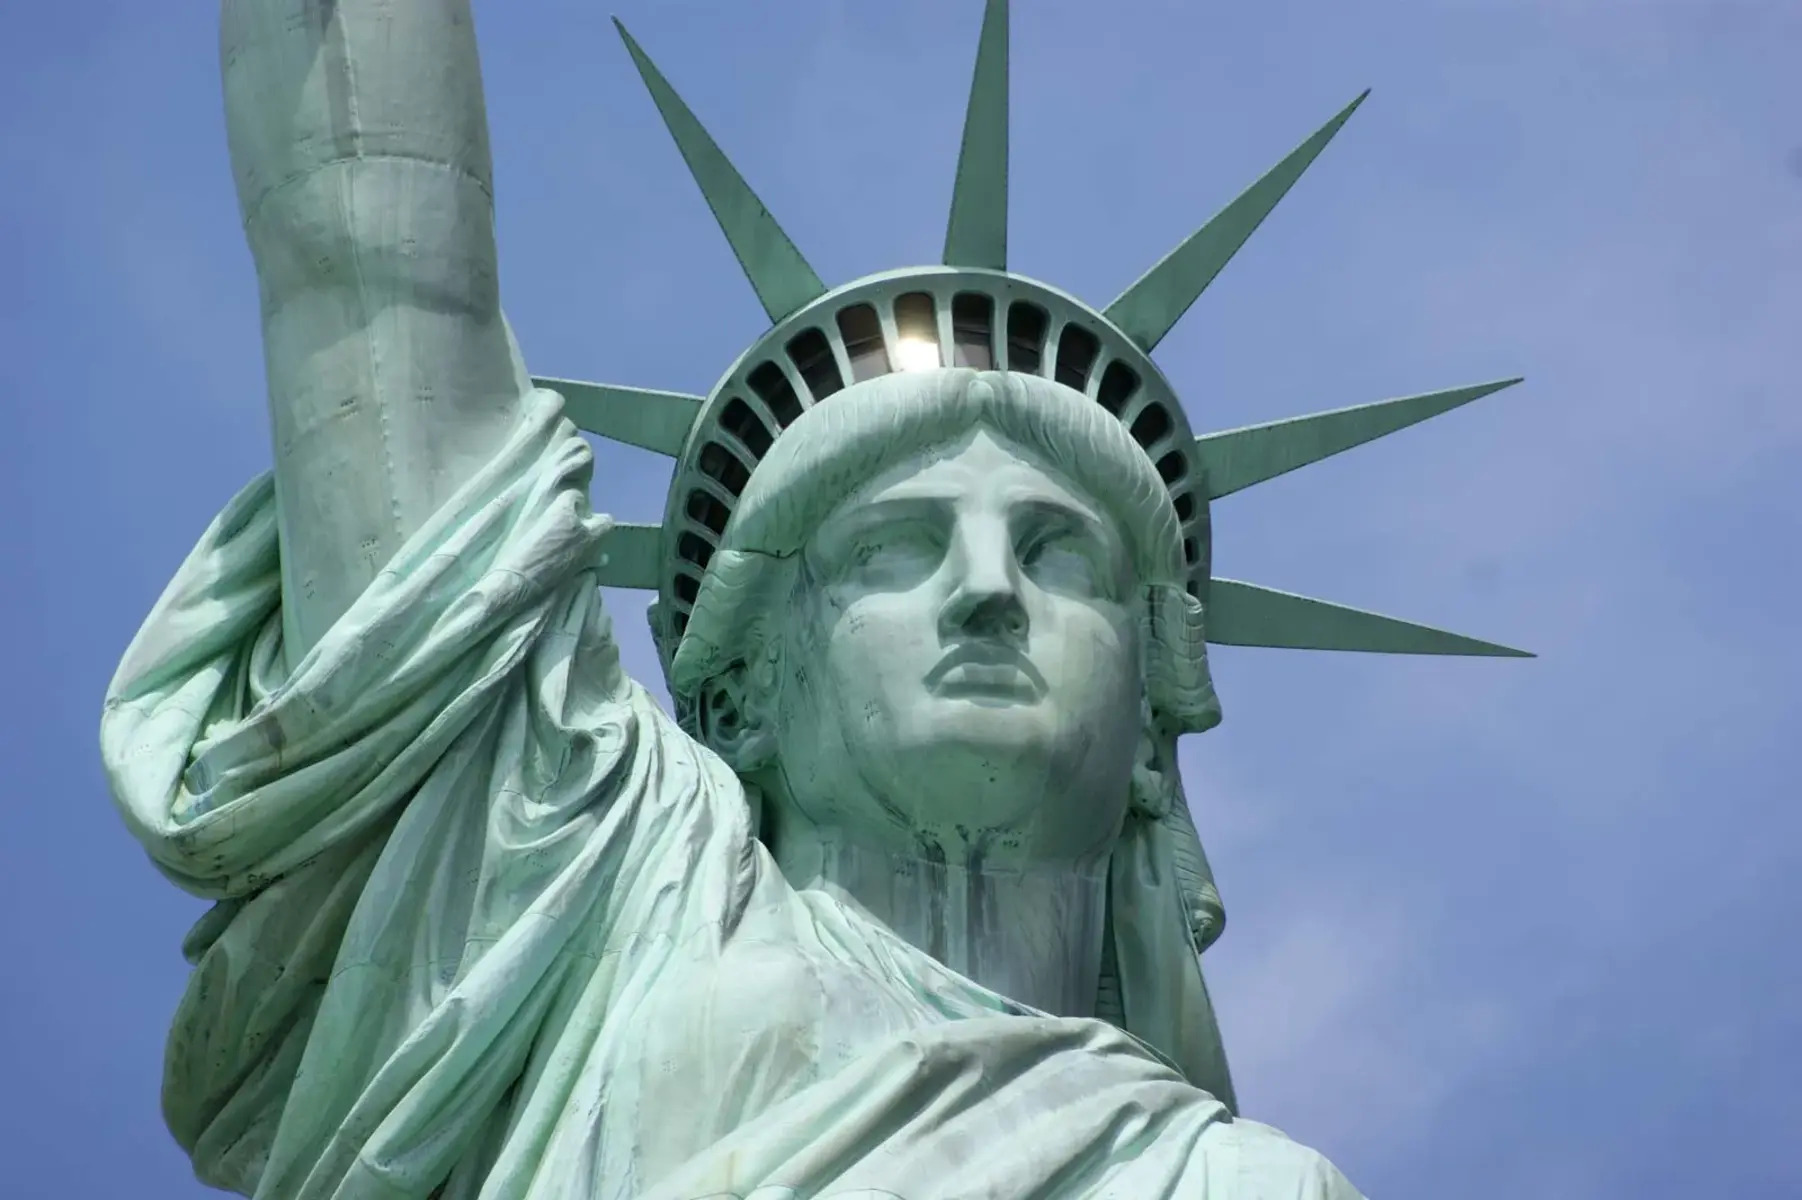 Who Was The Sculptor Of The Statue Of Liberty